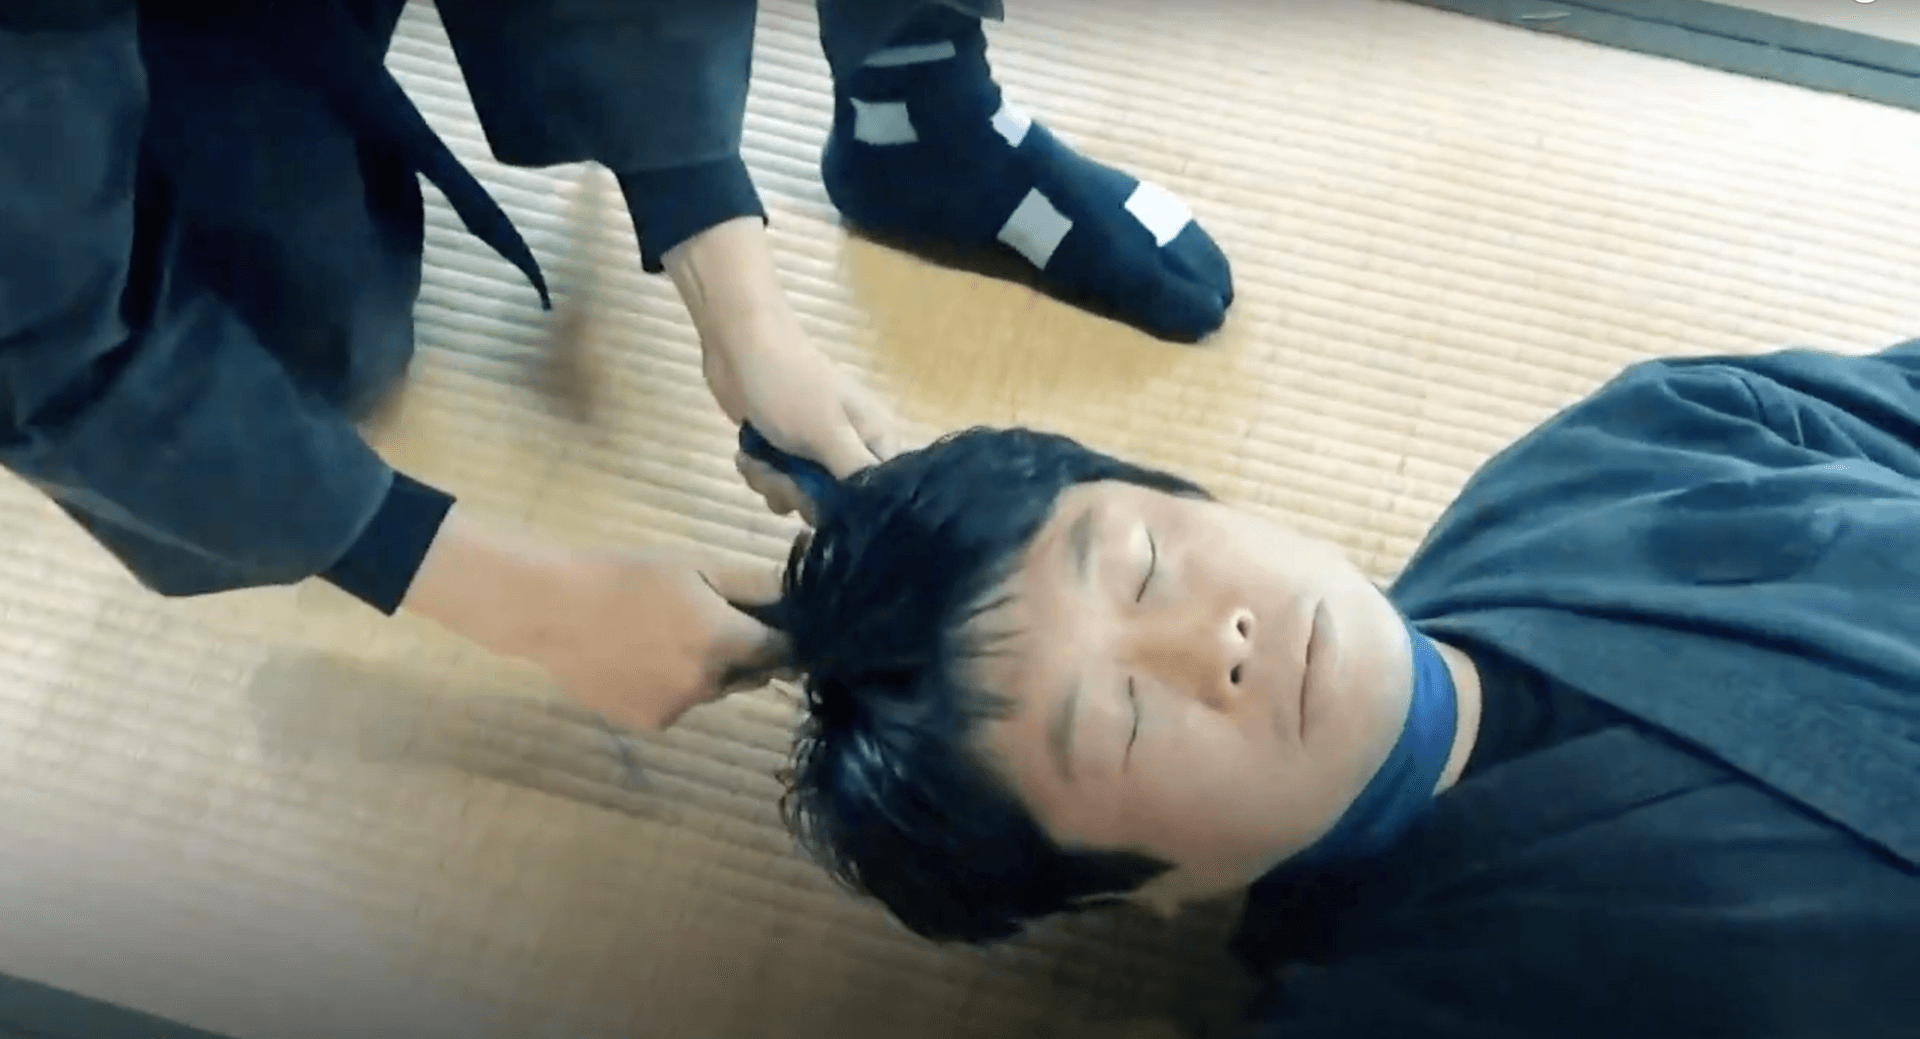 Ninja studies expert Mitsuhashi Genichi is choked with a cloth during a martial arts training session.